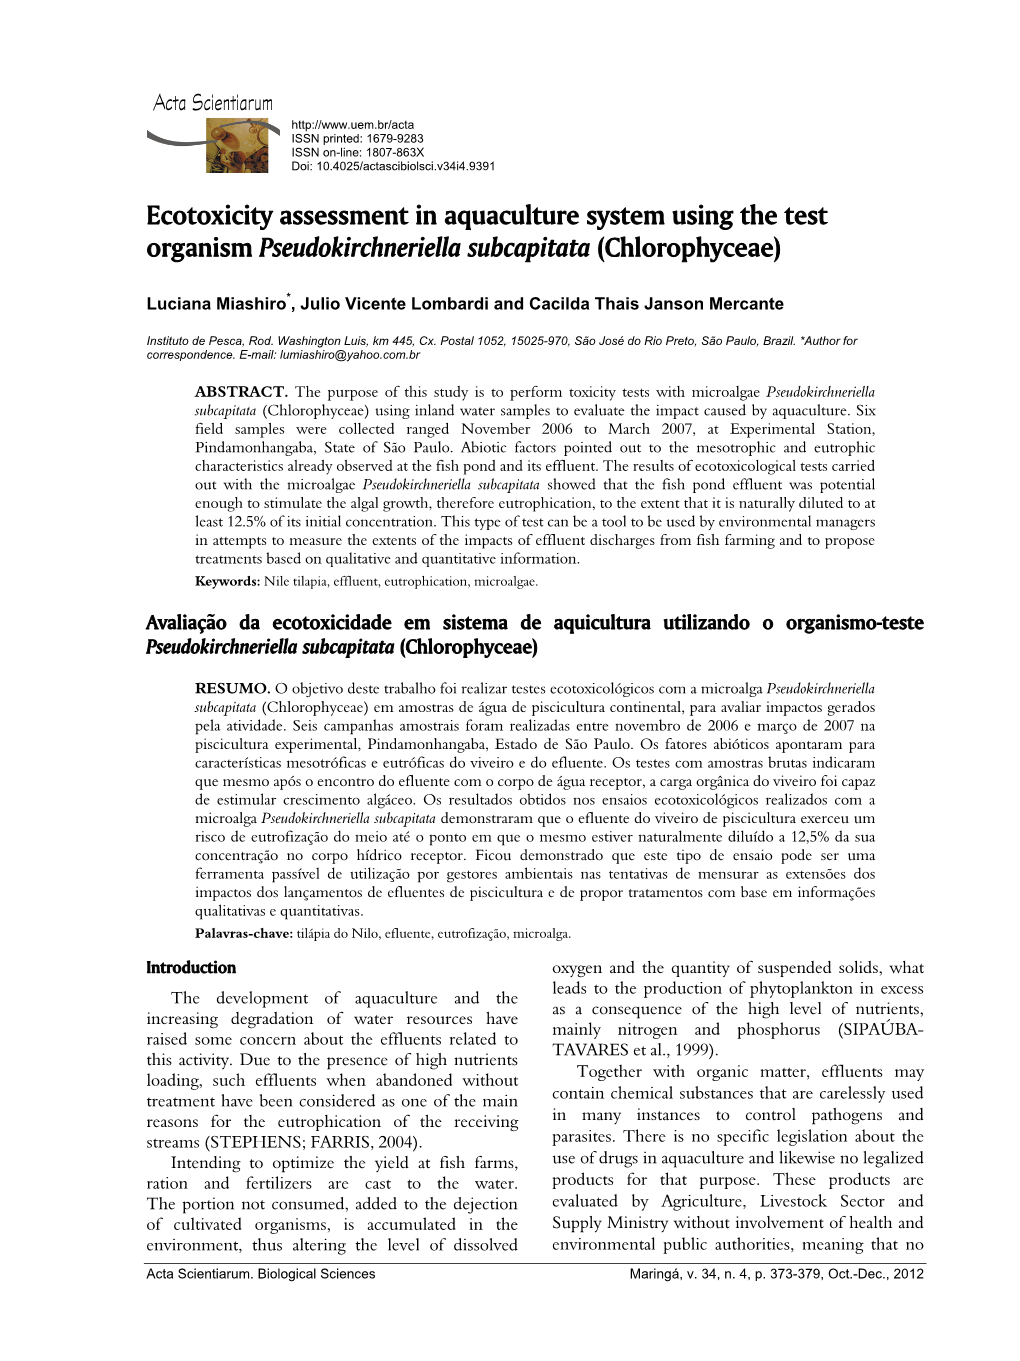 Ecotoxicity Assessment in Aquaculture System Using the Test Organism Pseudokirchneriella Subcapitata (Chlorophyceae)